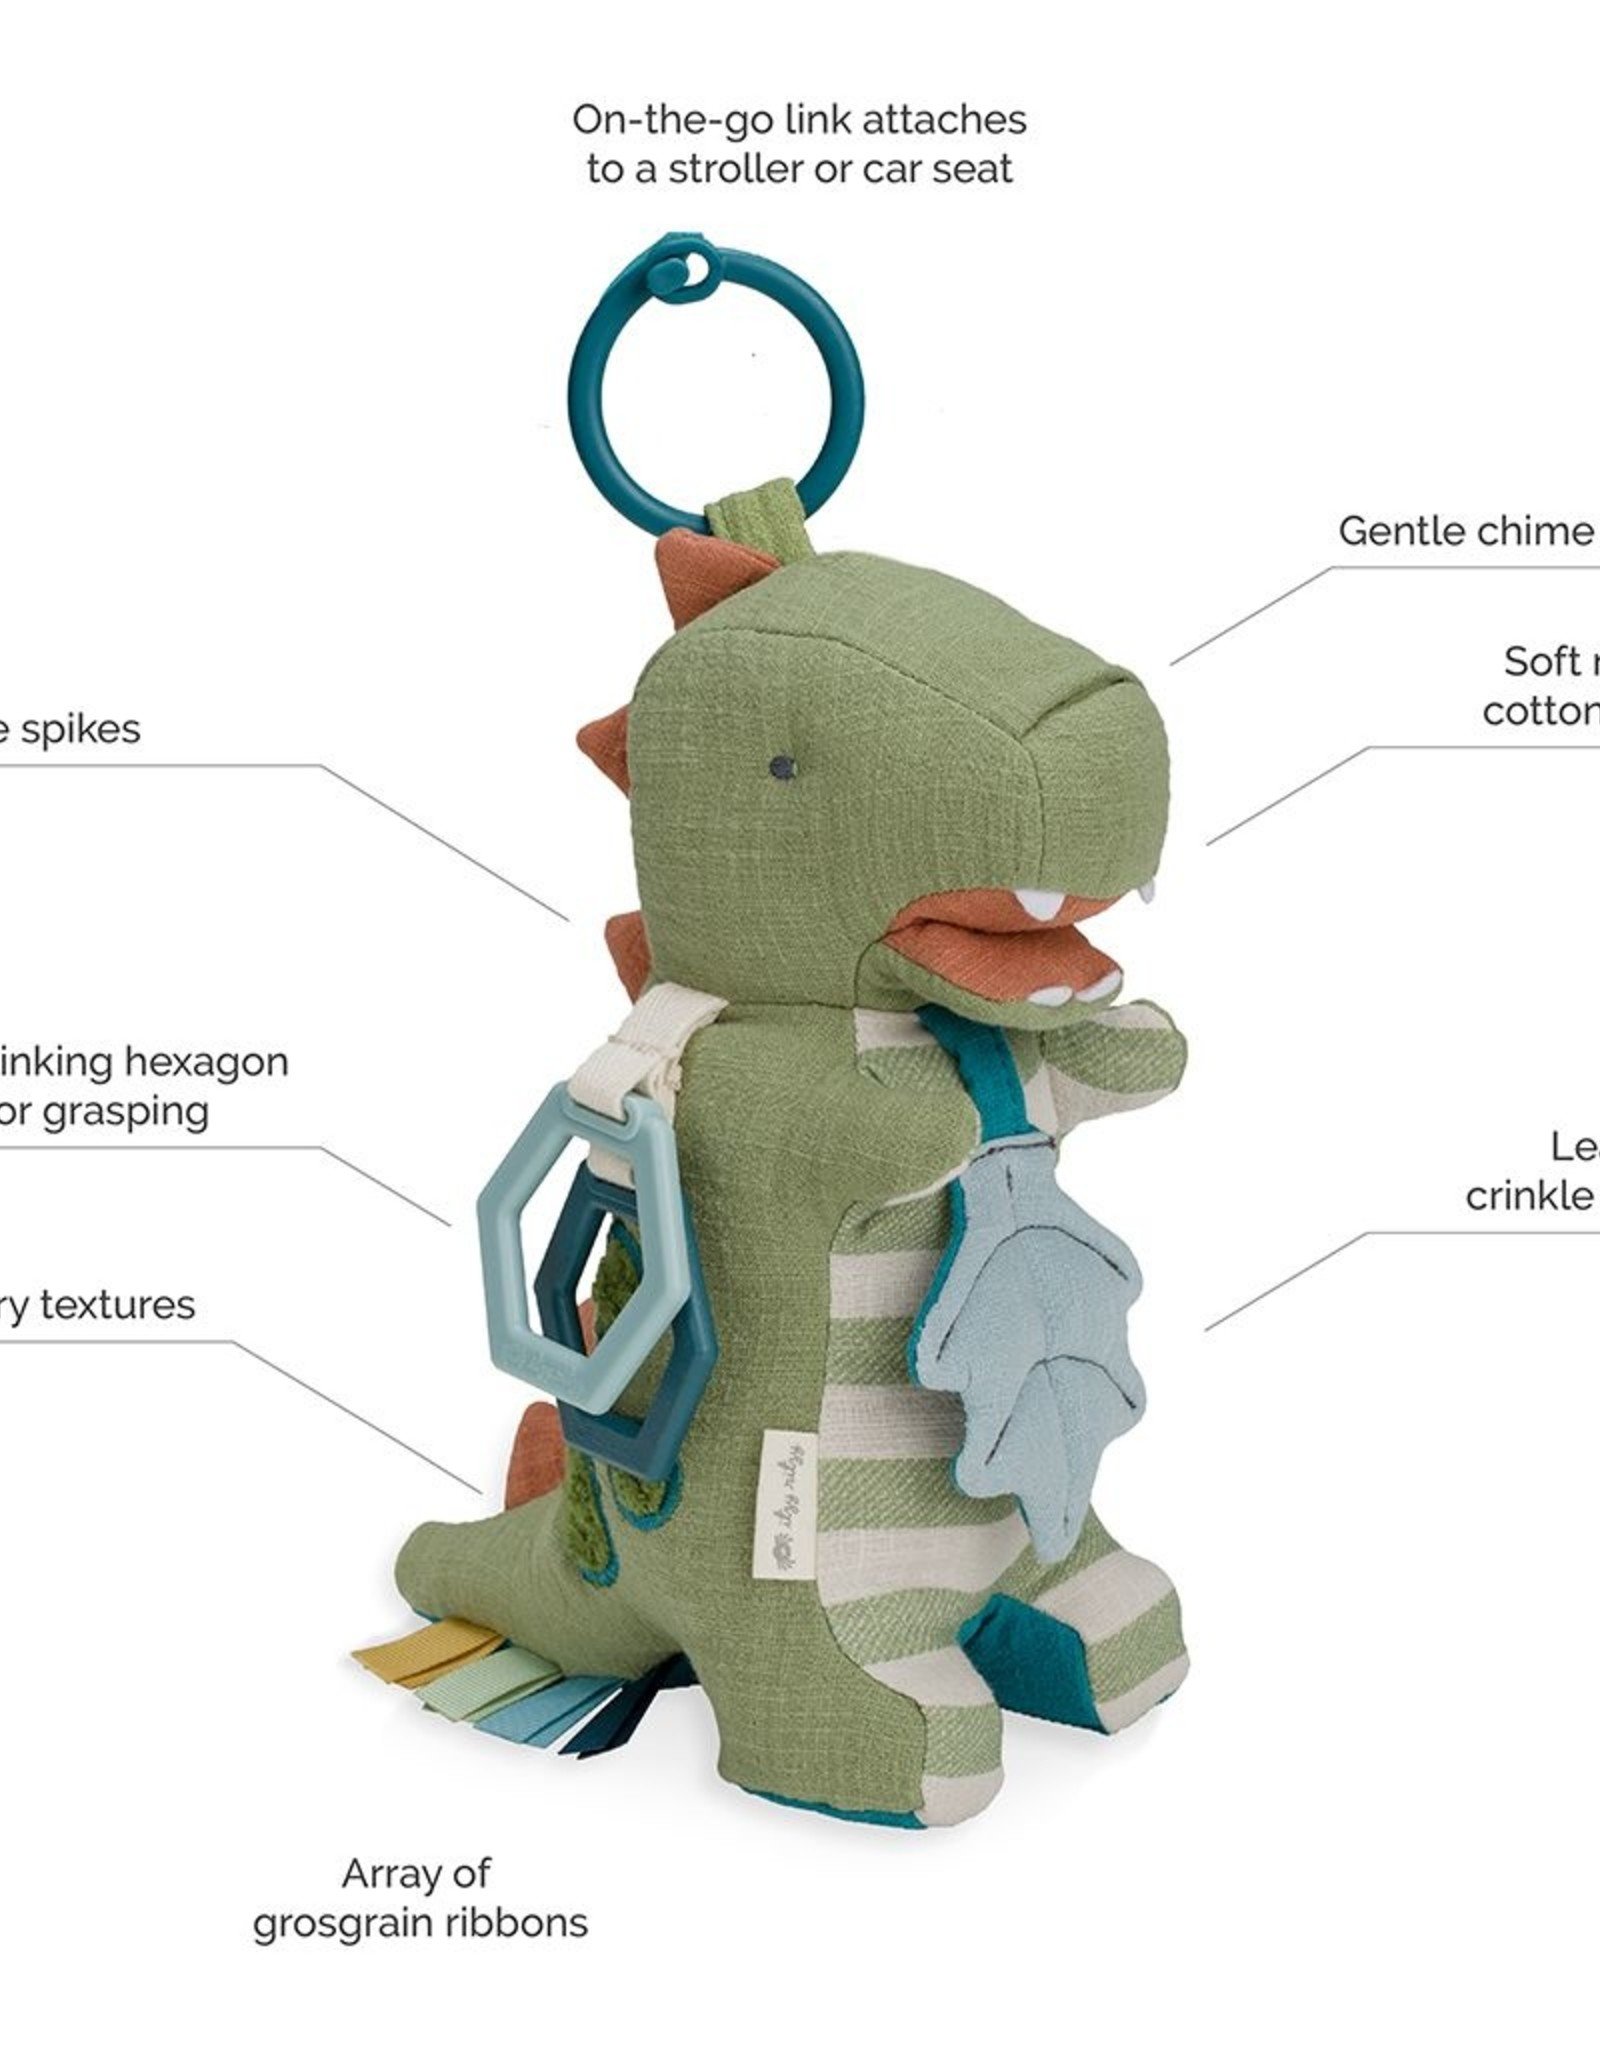 Itzy Ritzy Link & Love Dino Activity Plush w/ Teether Toy